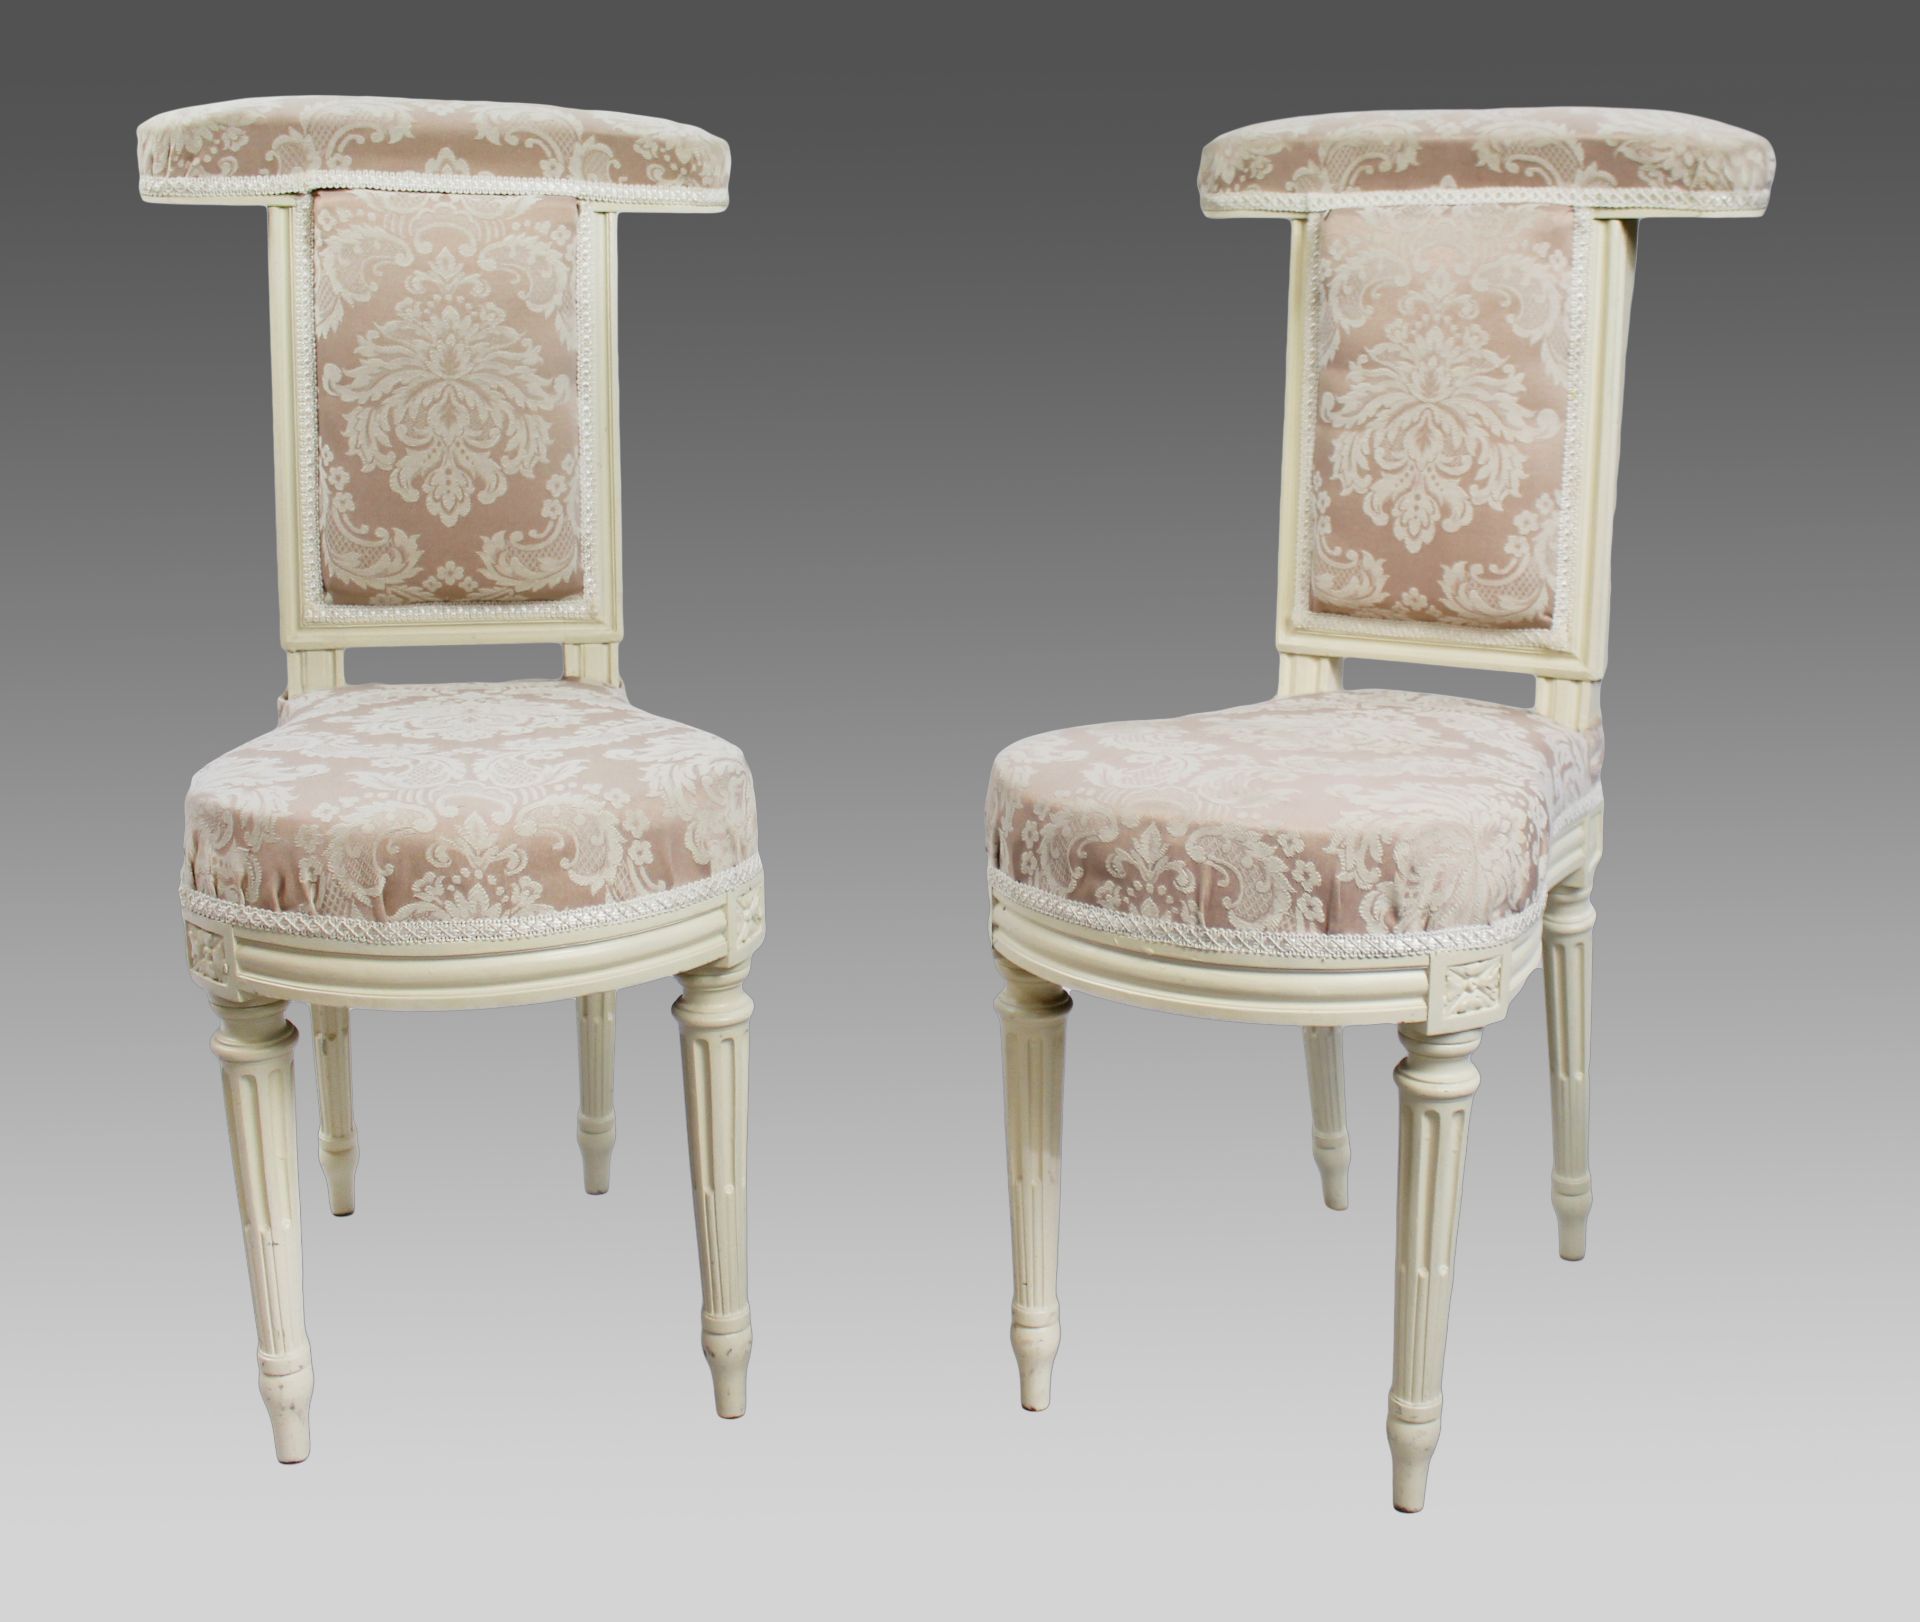 Pair of Early Antique French Painted Voyeuse Chairs - Image 2 of 7